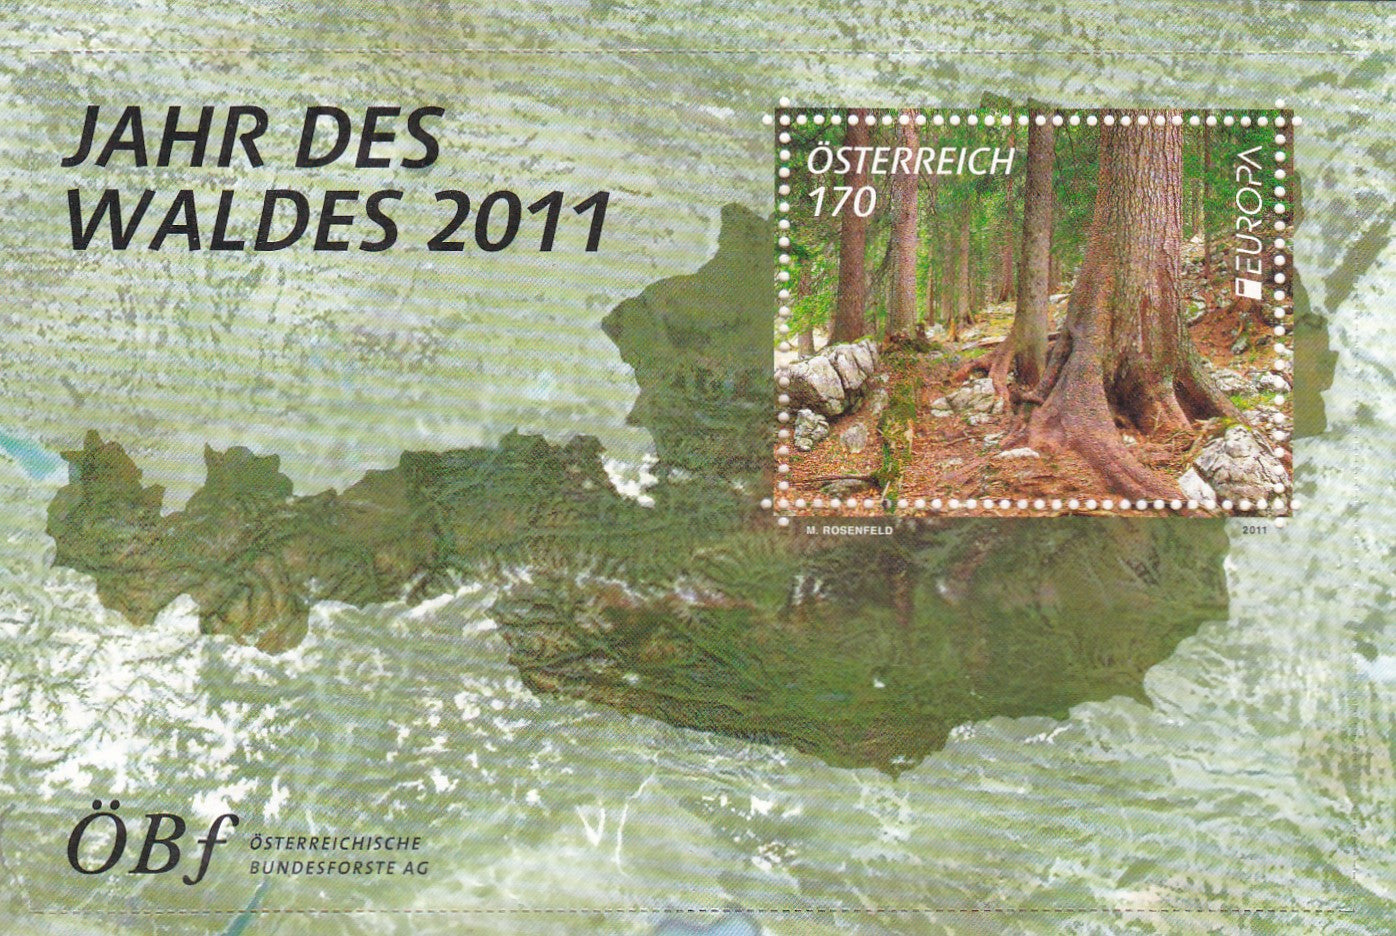 Austria- old issue of stamps with real SEEDS of the tree shown in the stamps-Rare